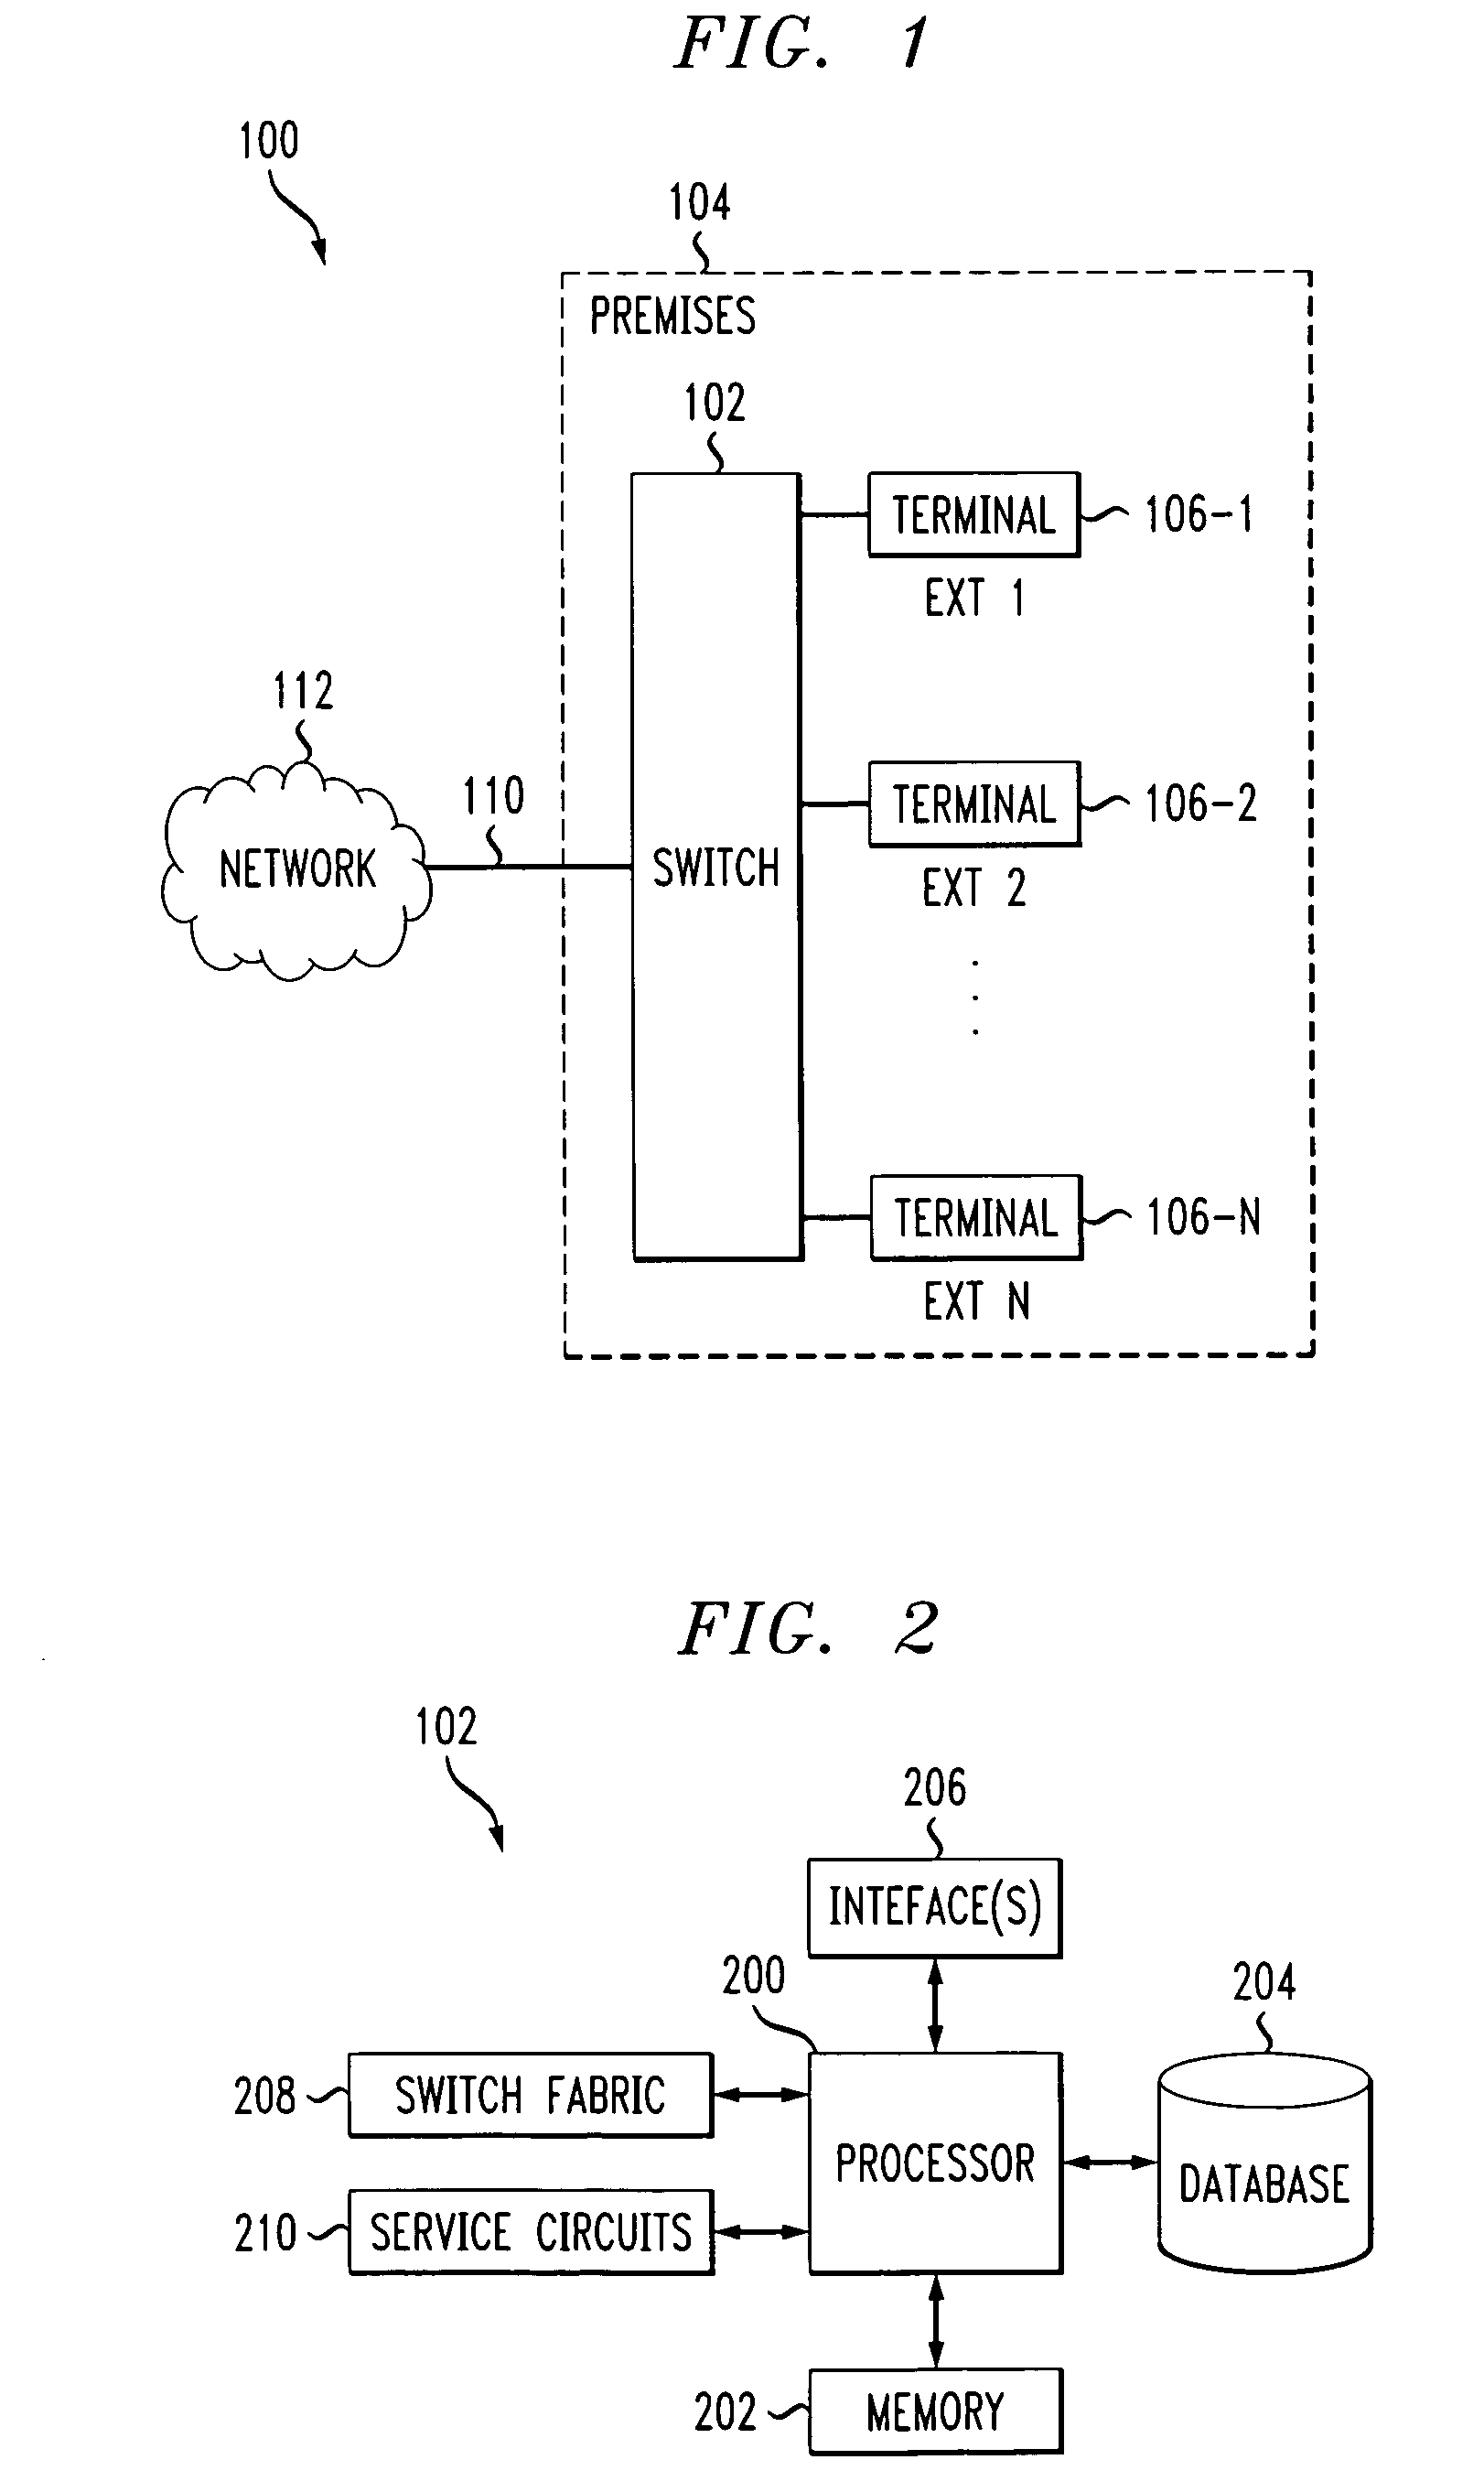 Method and apparatus for monitoring of switch resources using resource group definitions